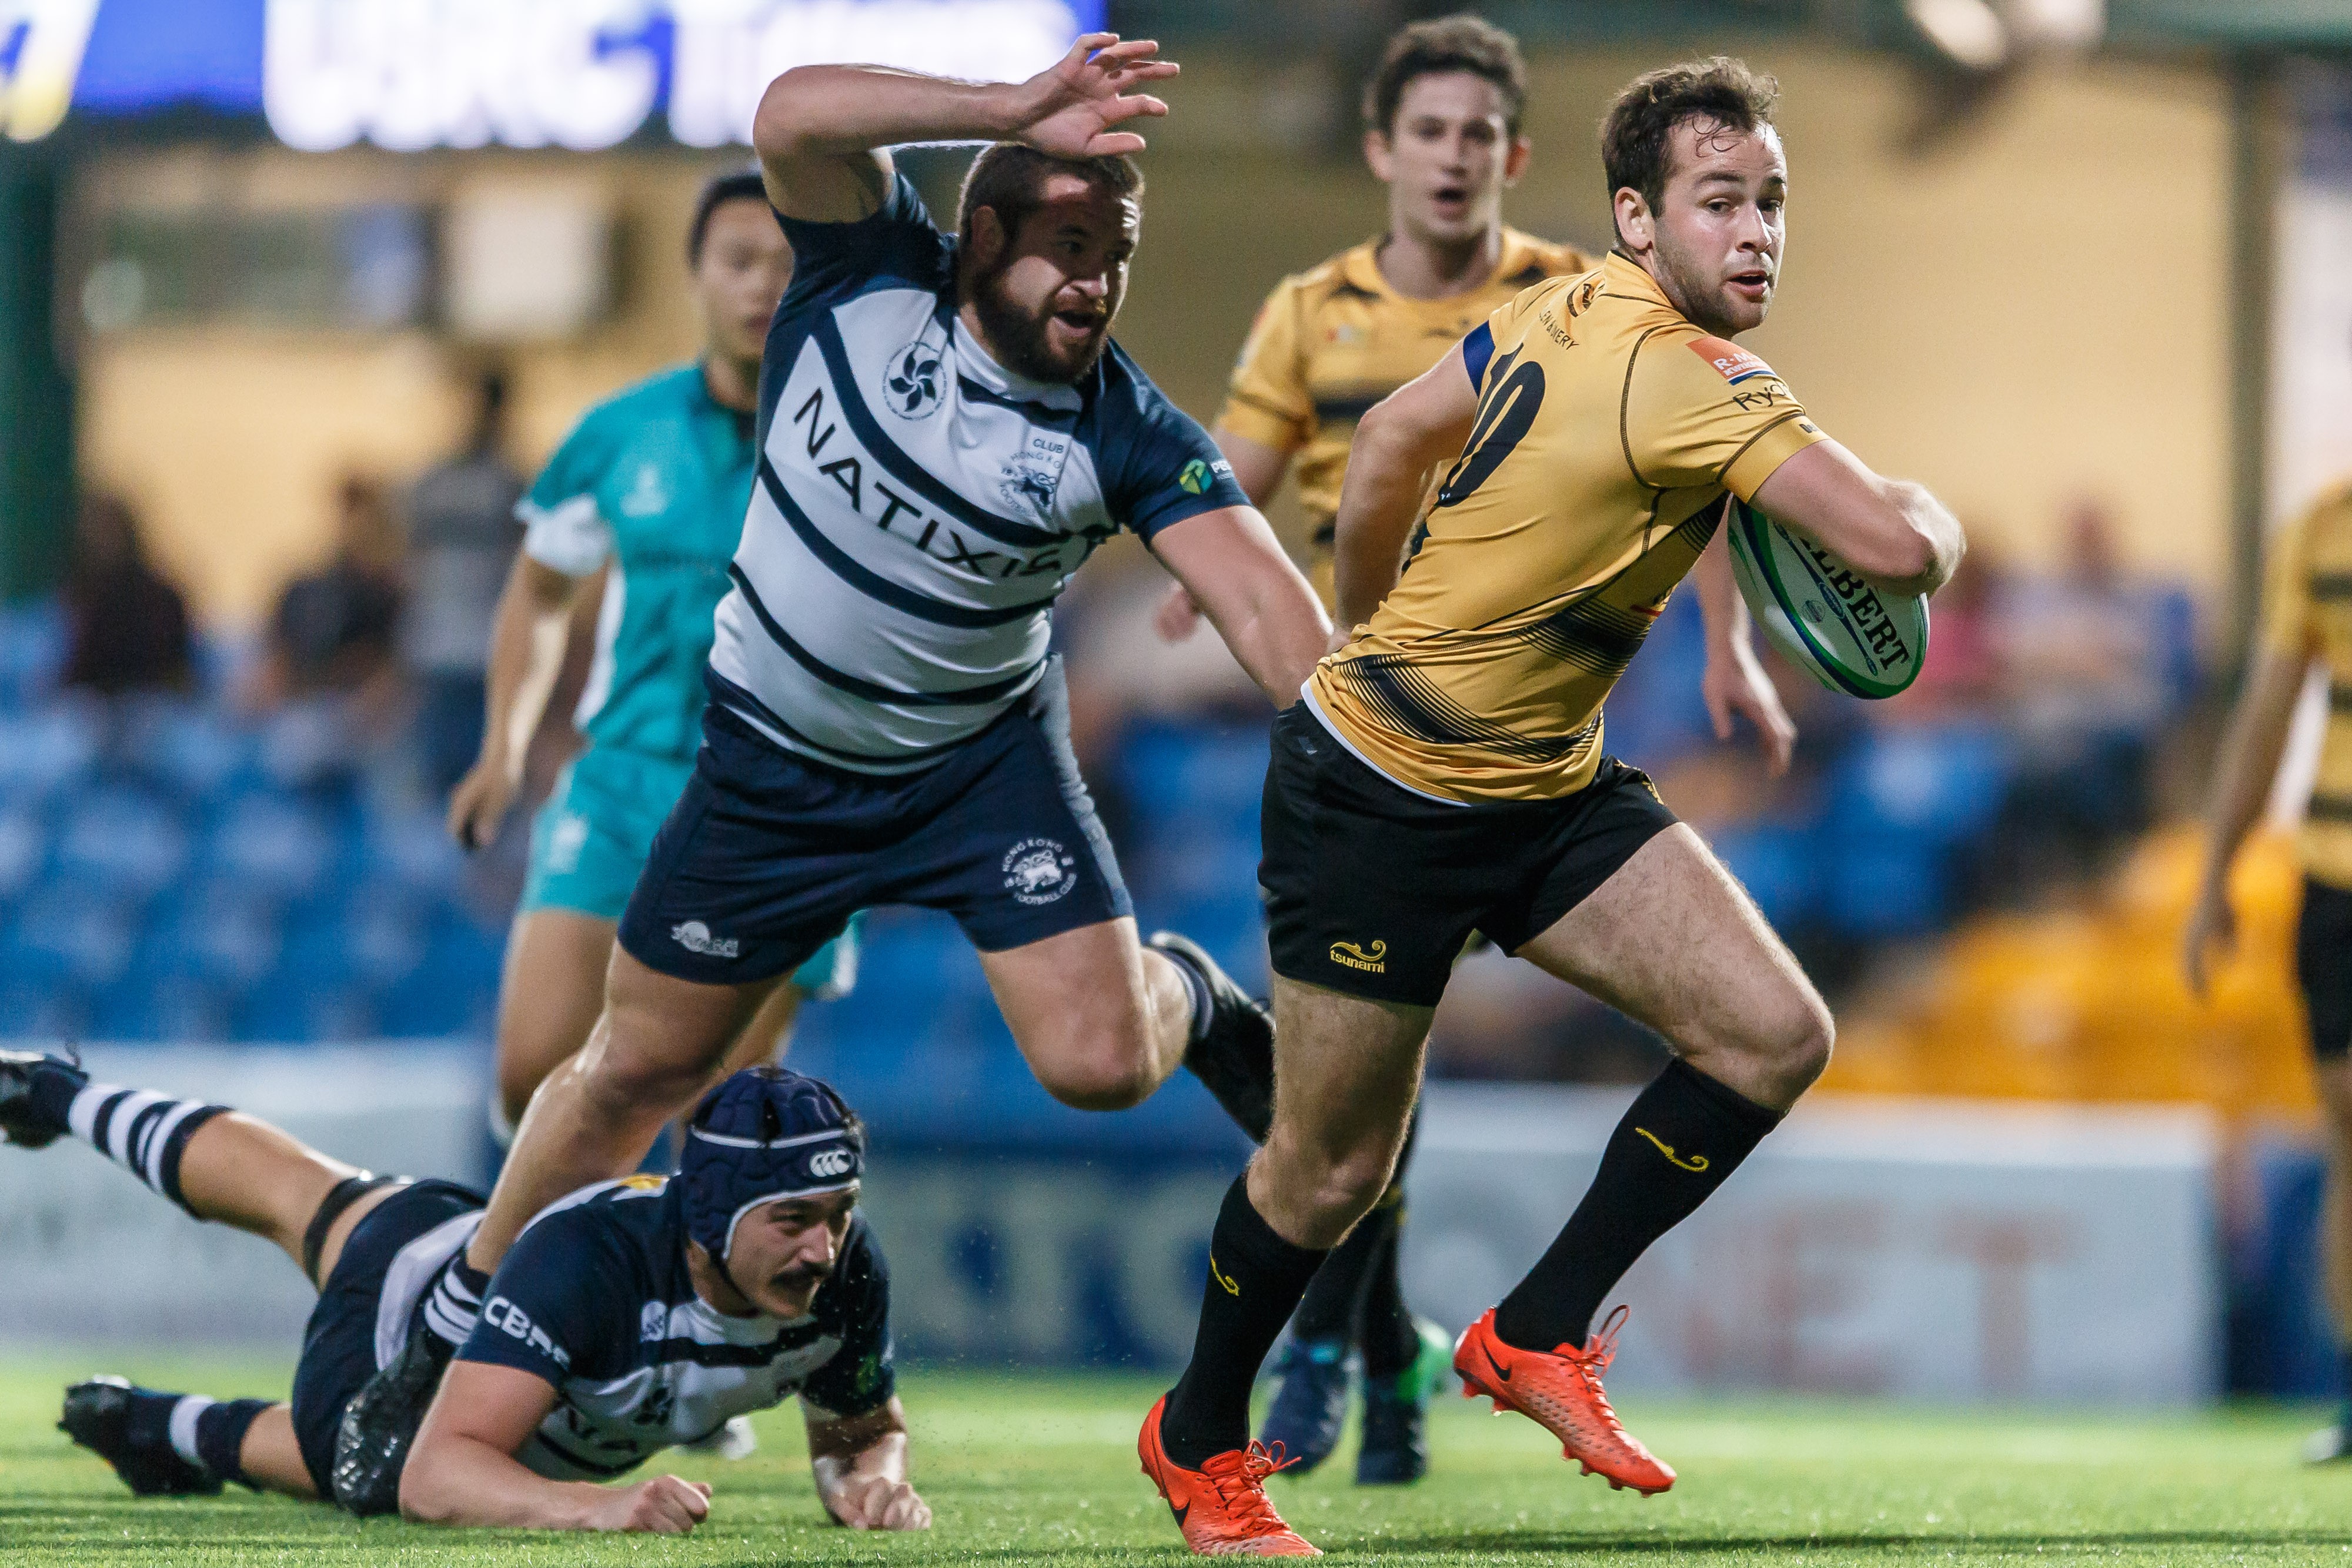 Robbie Keith makes ground for Tigers in their win over HKFC in the Hong Kong Premiership. Photo: HKRU